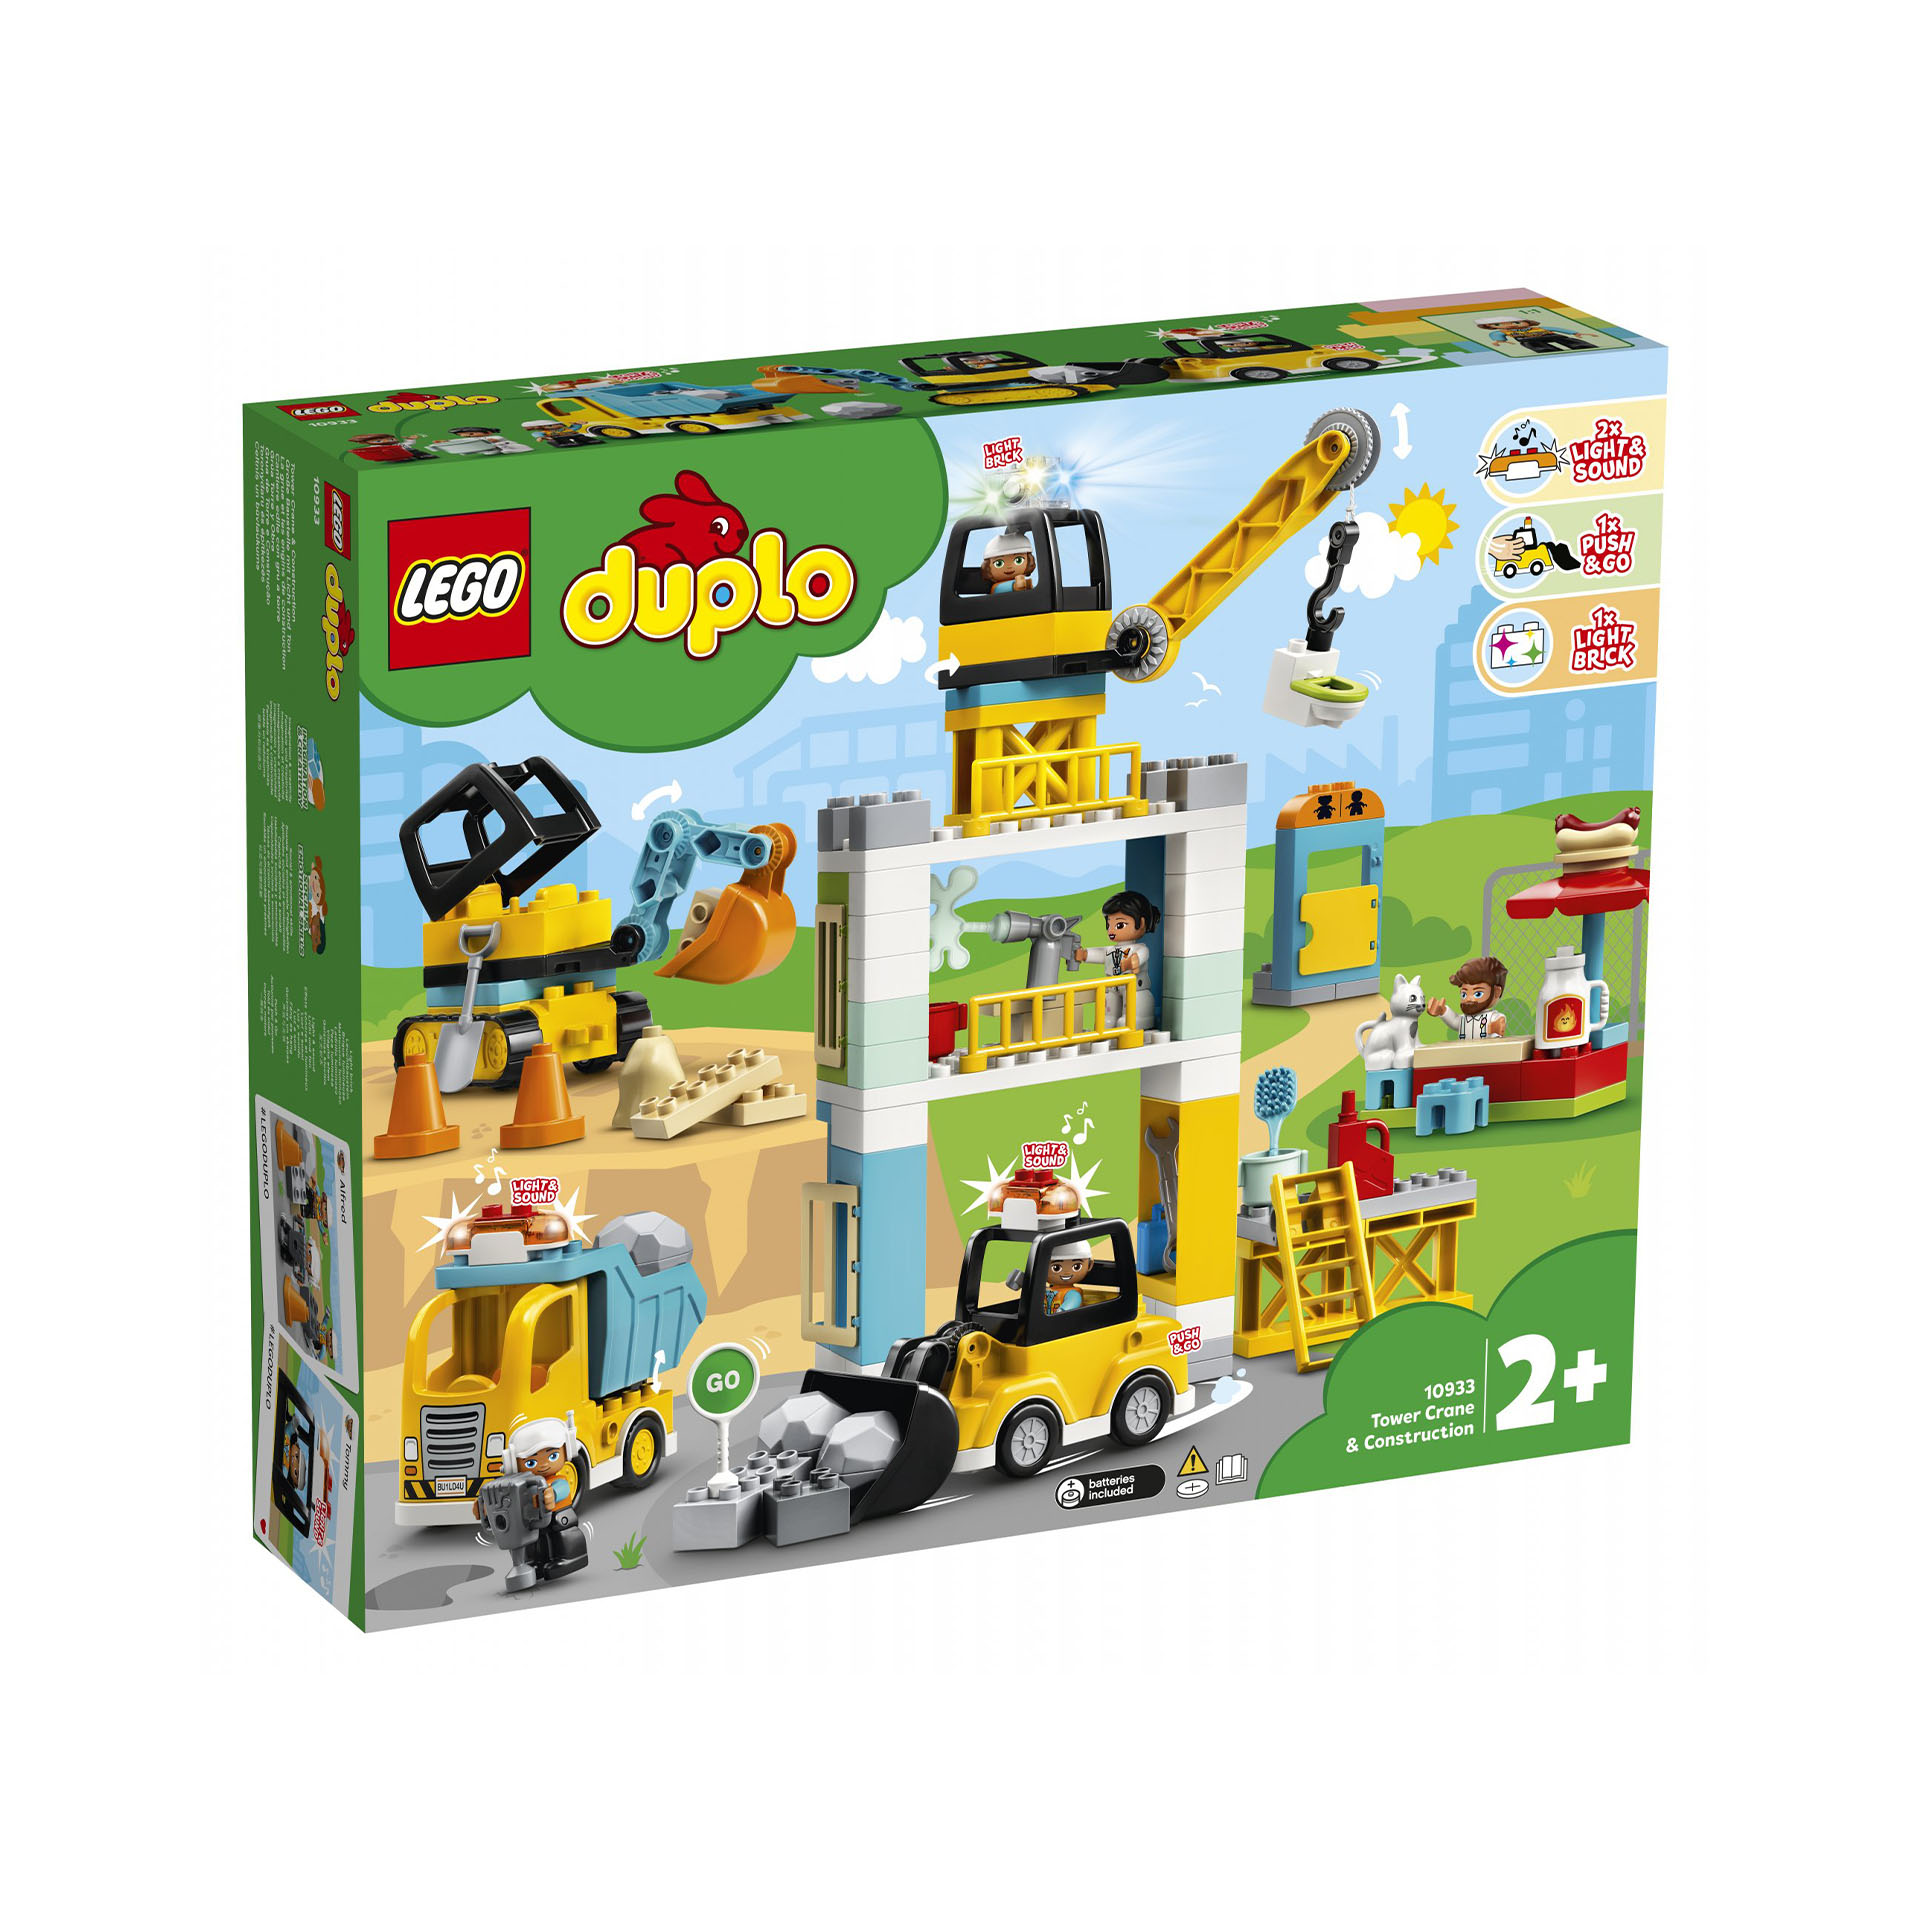 LEGO Duplo Cantiere edile con gru a torre 10933, , large